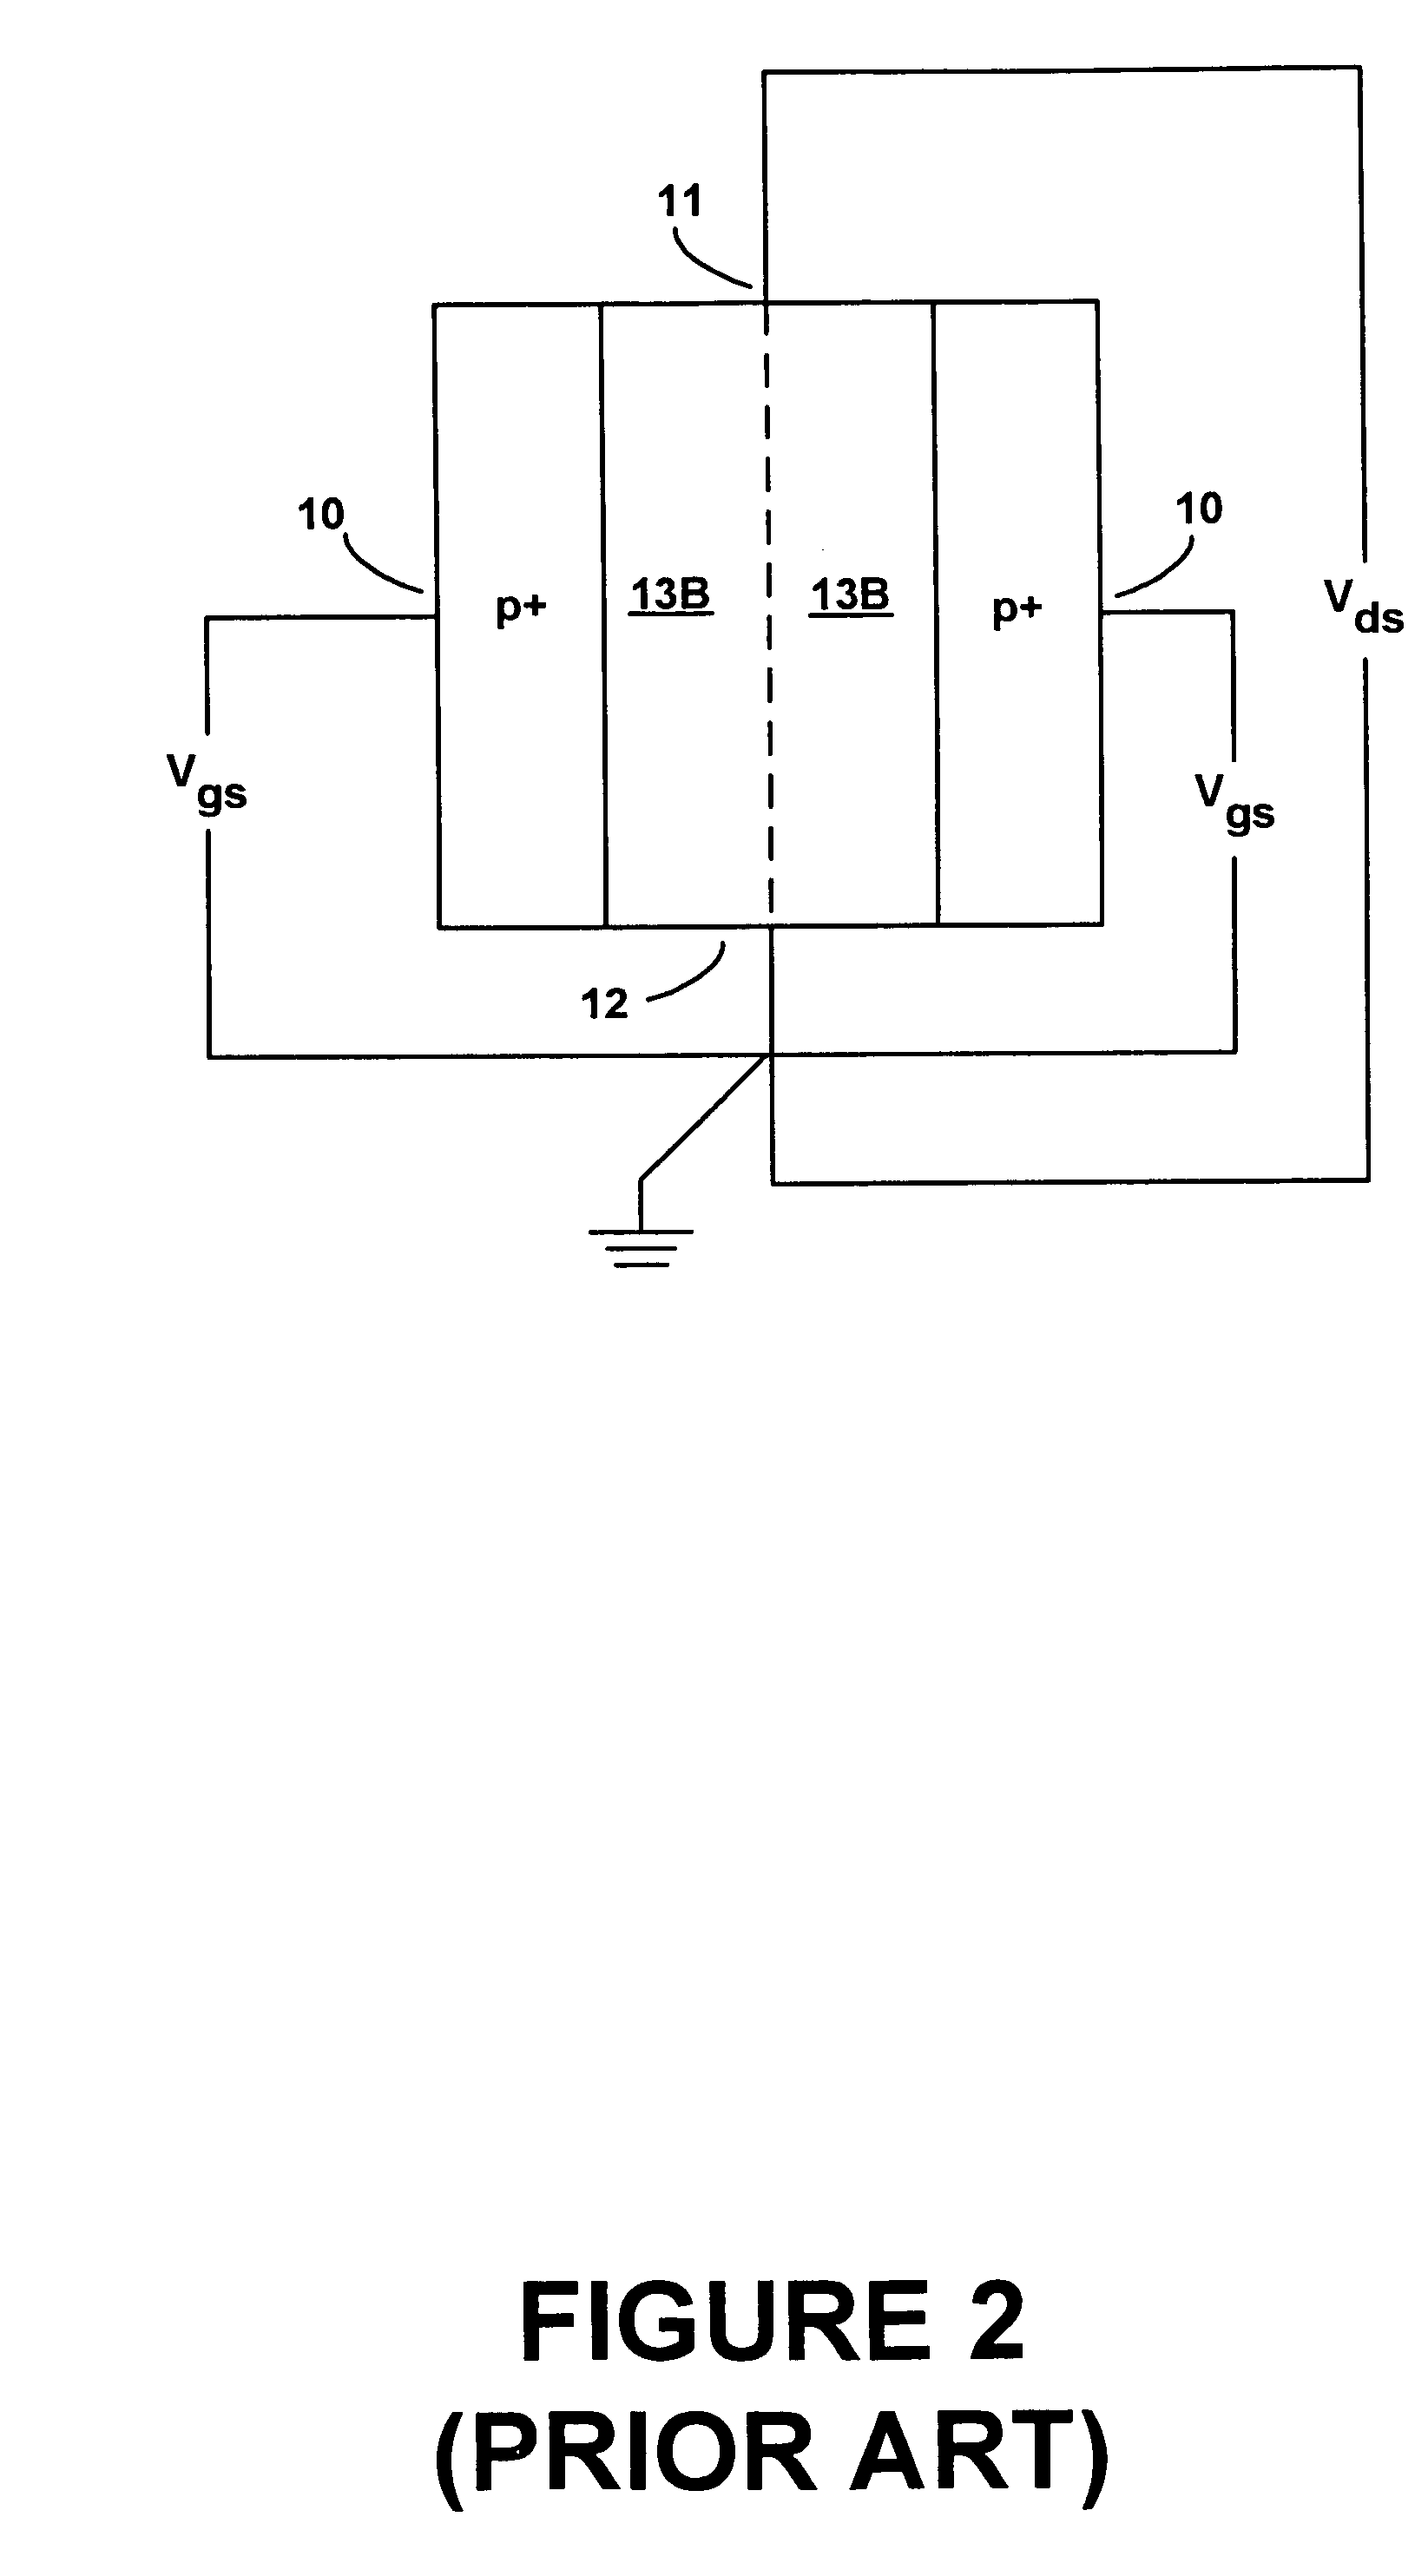 Method for a junction field effect transistor with reduced gate capacitance